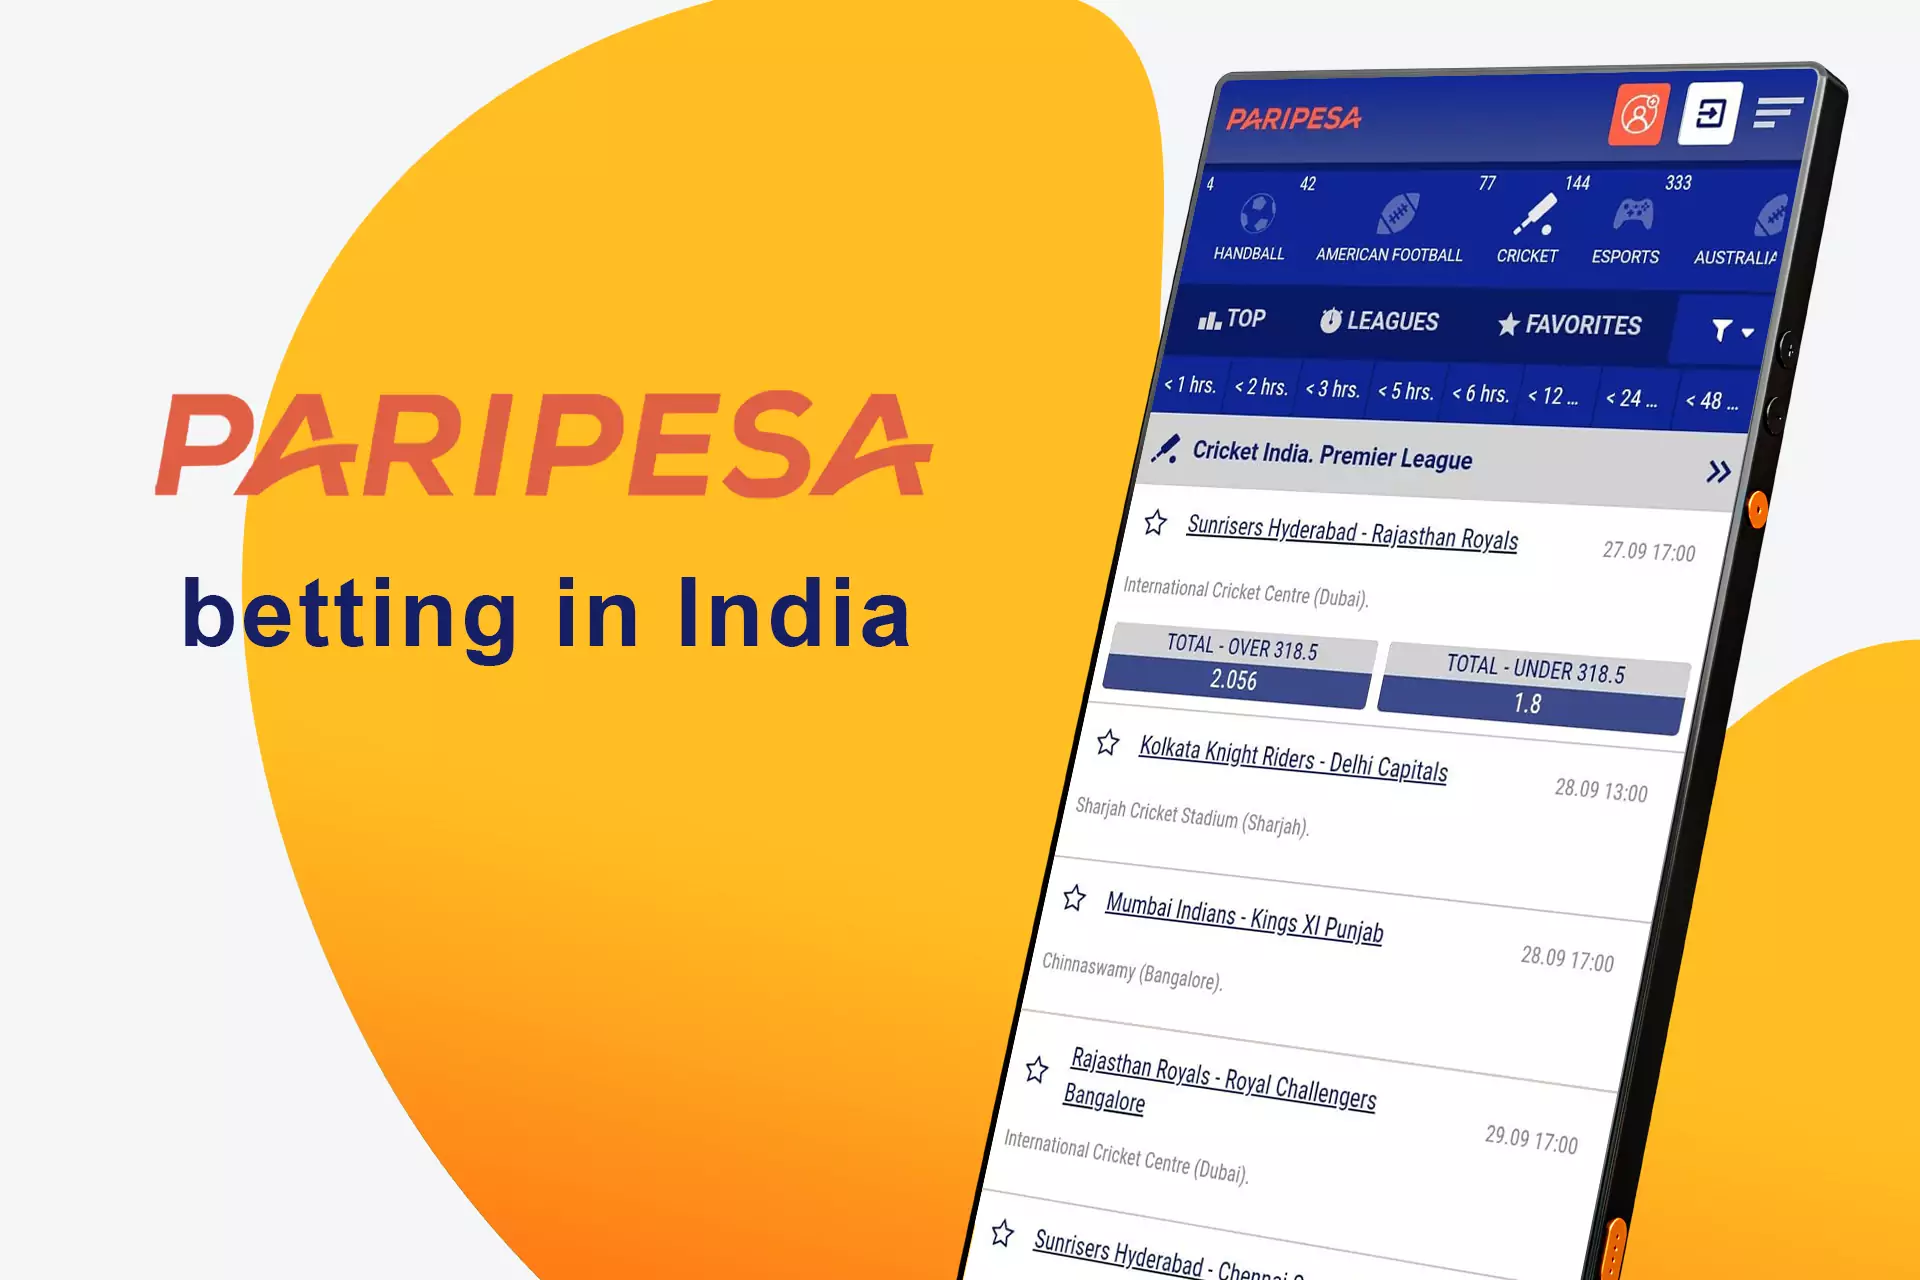 To be able to place bets on PariPesa firstly you have to create an account.